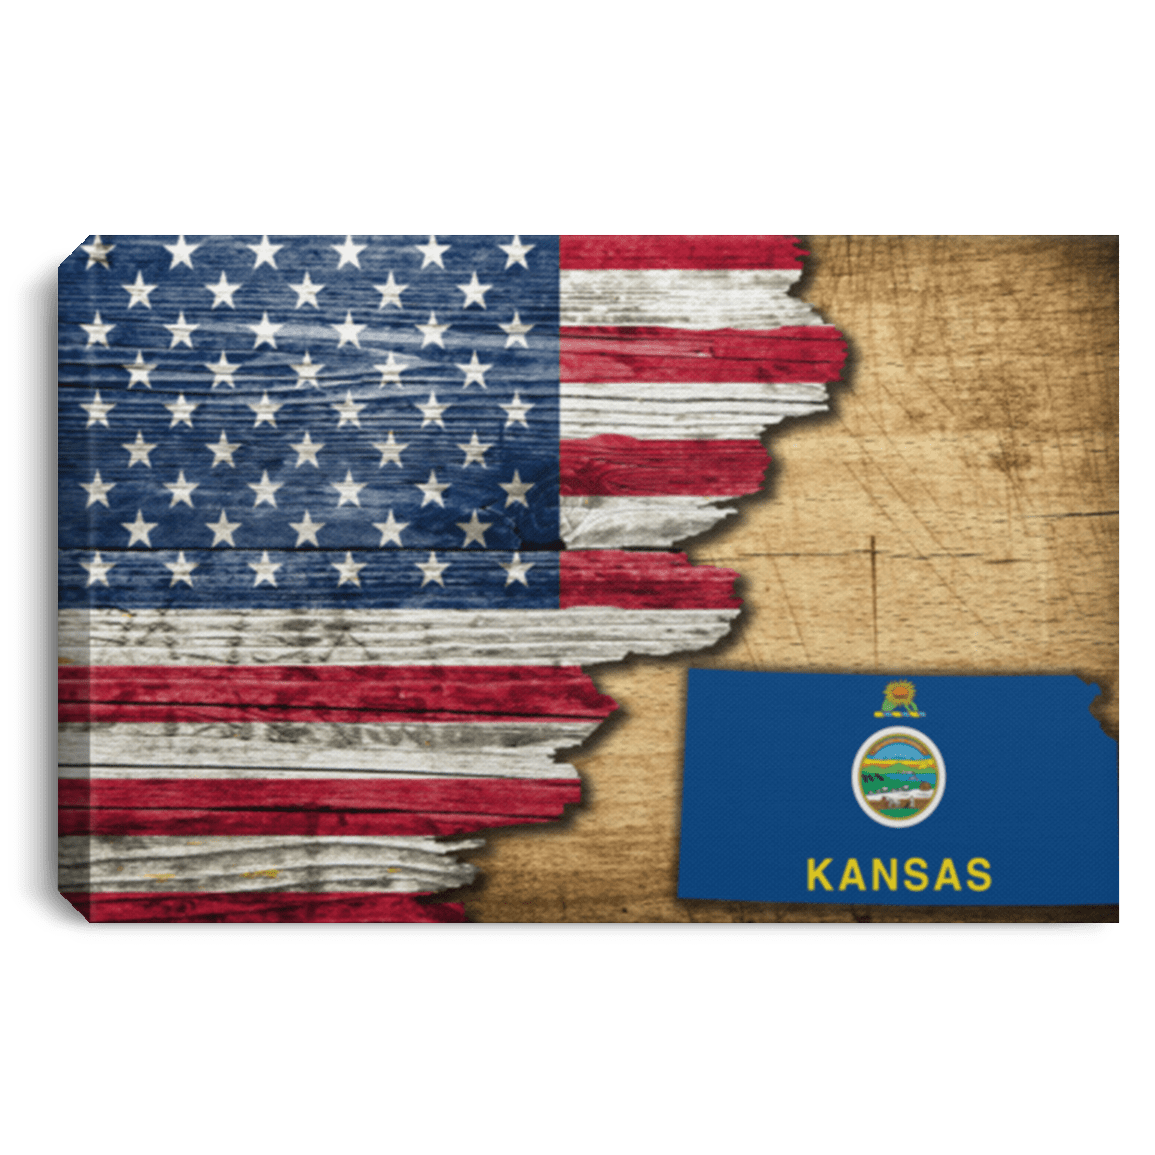 United States/Kansas Flag Ripped Effect 18X12 Inches Landscape Canvas .75In Frame